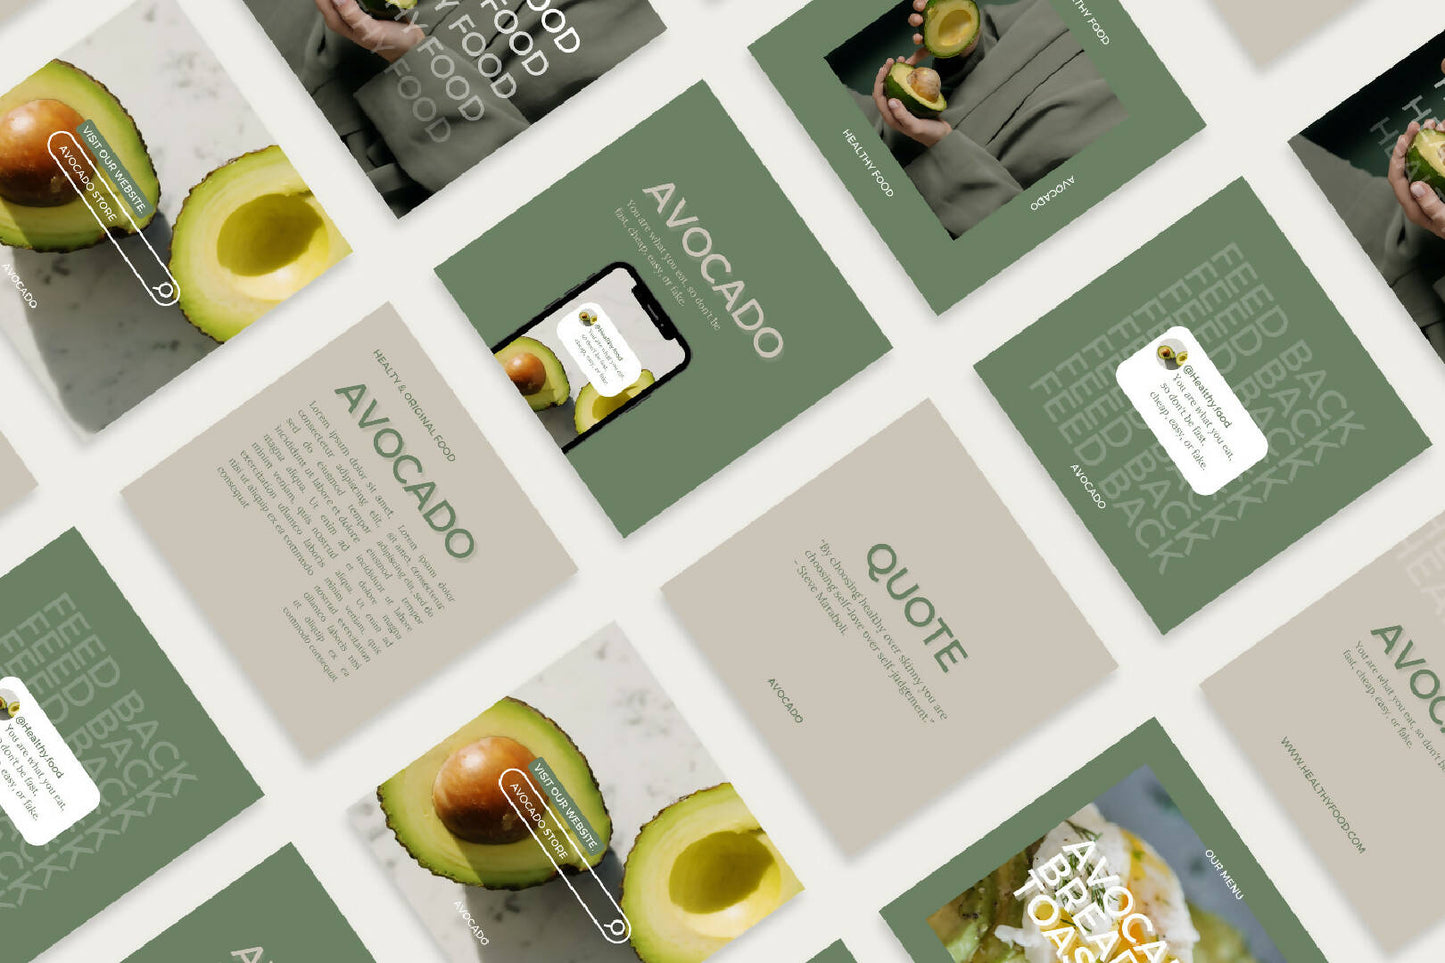 Food Restaurant Template for Instagram - Editable with Canva